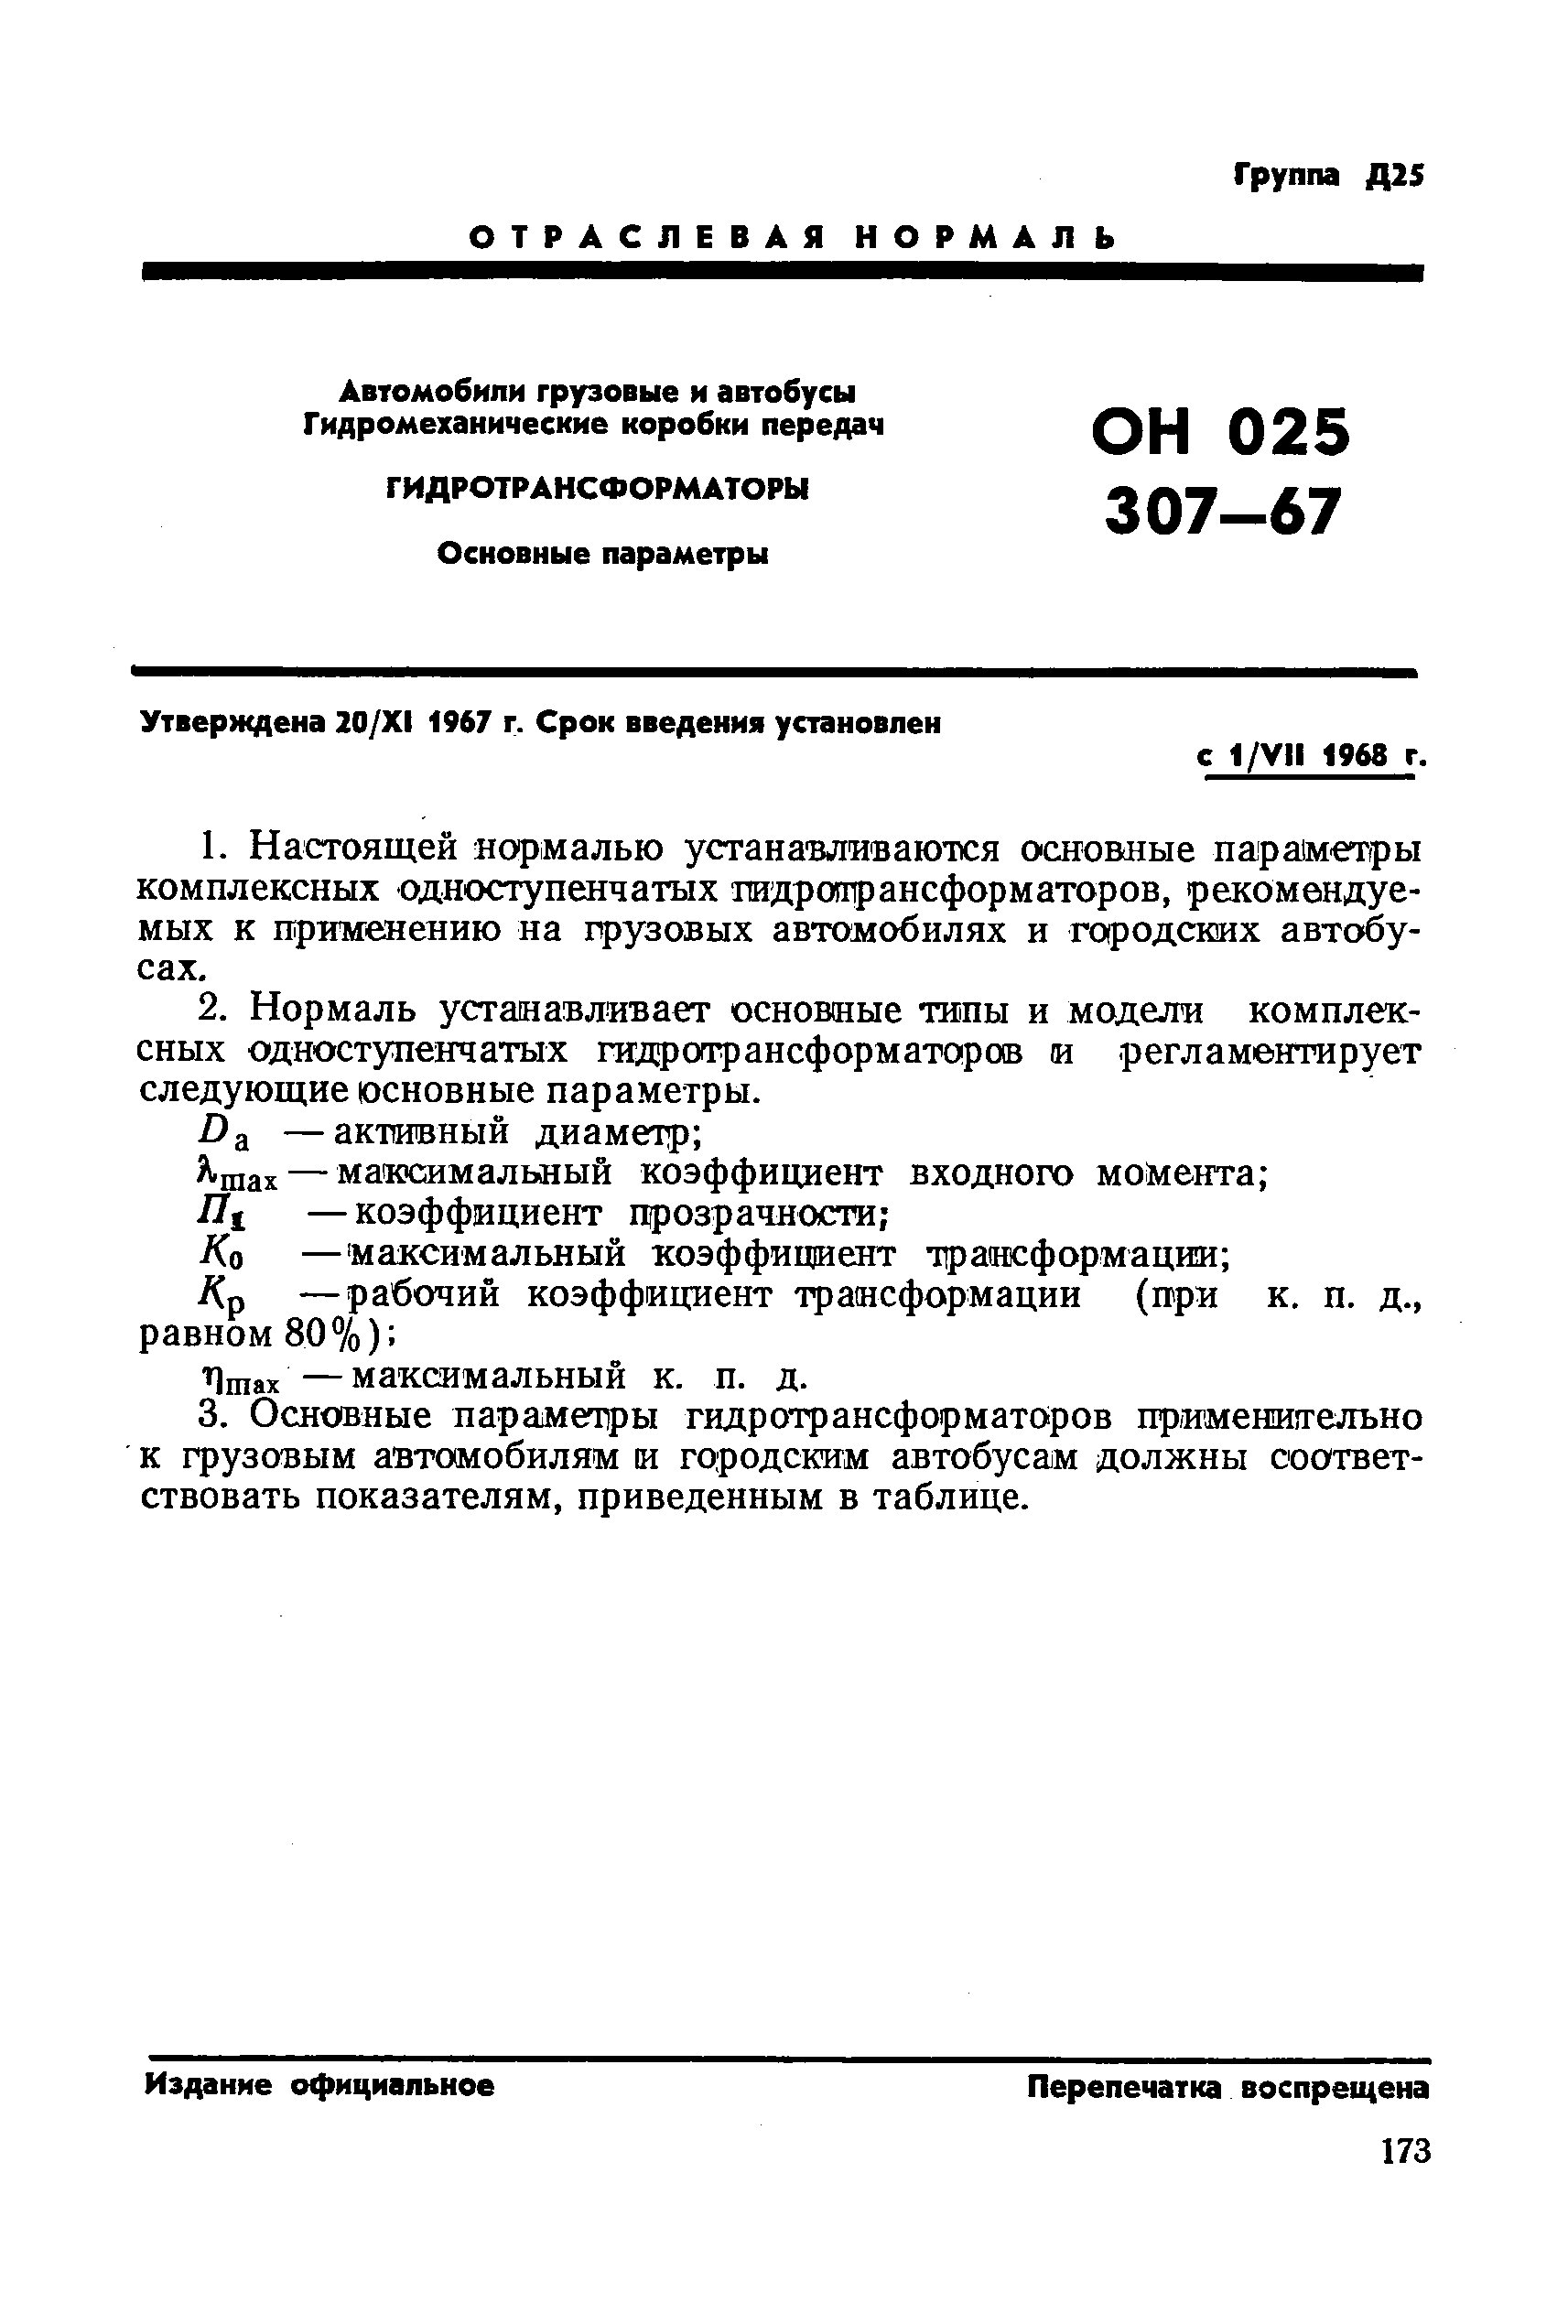 ОН 025 307-67